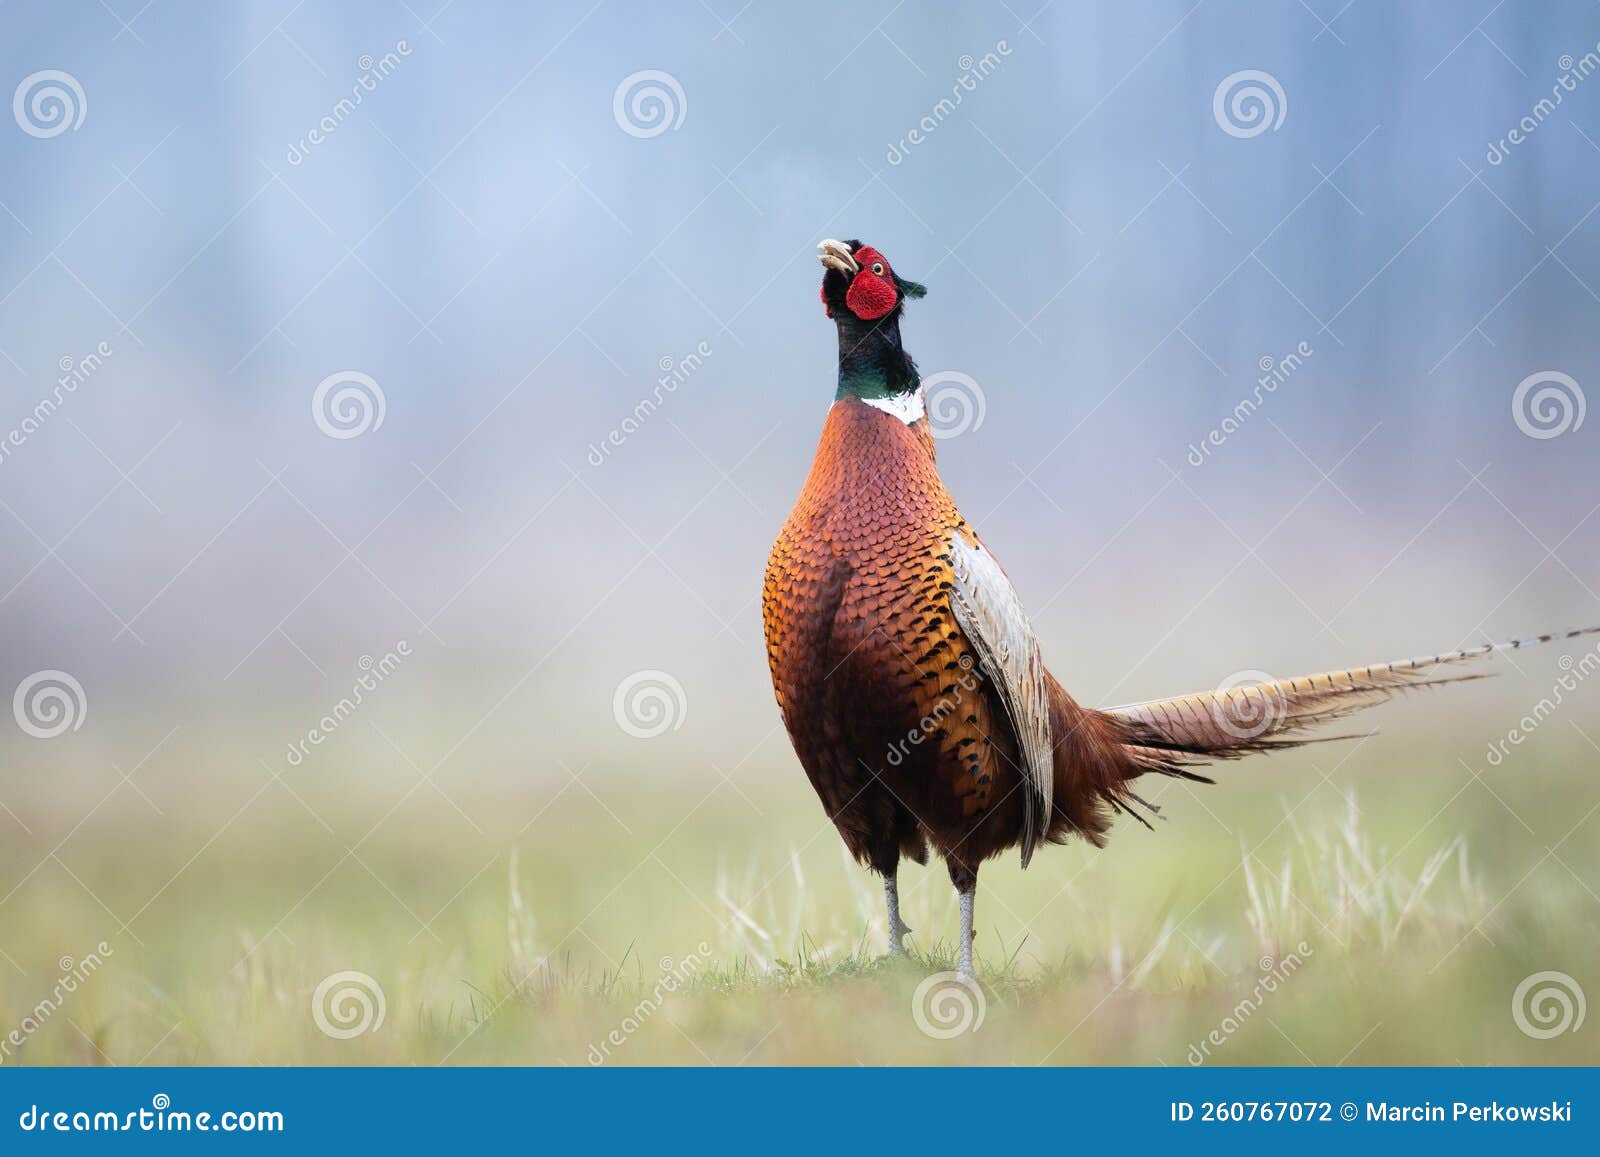 Photographing the Ring-Neck Pheasant | Welcome to NancyBirdPhotography.com